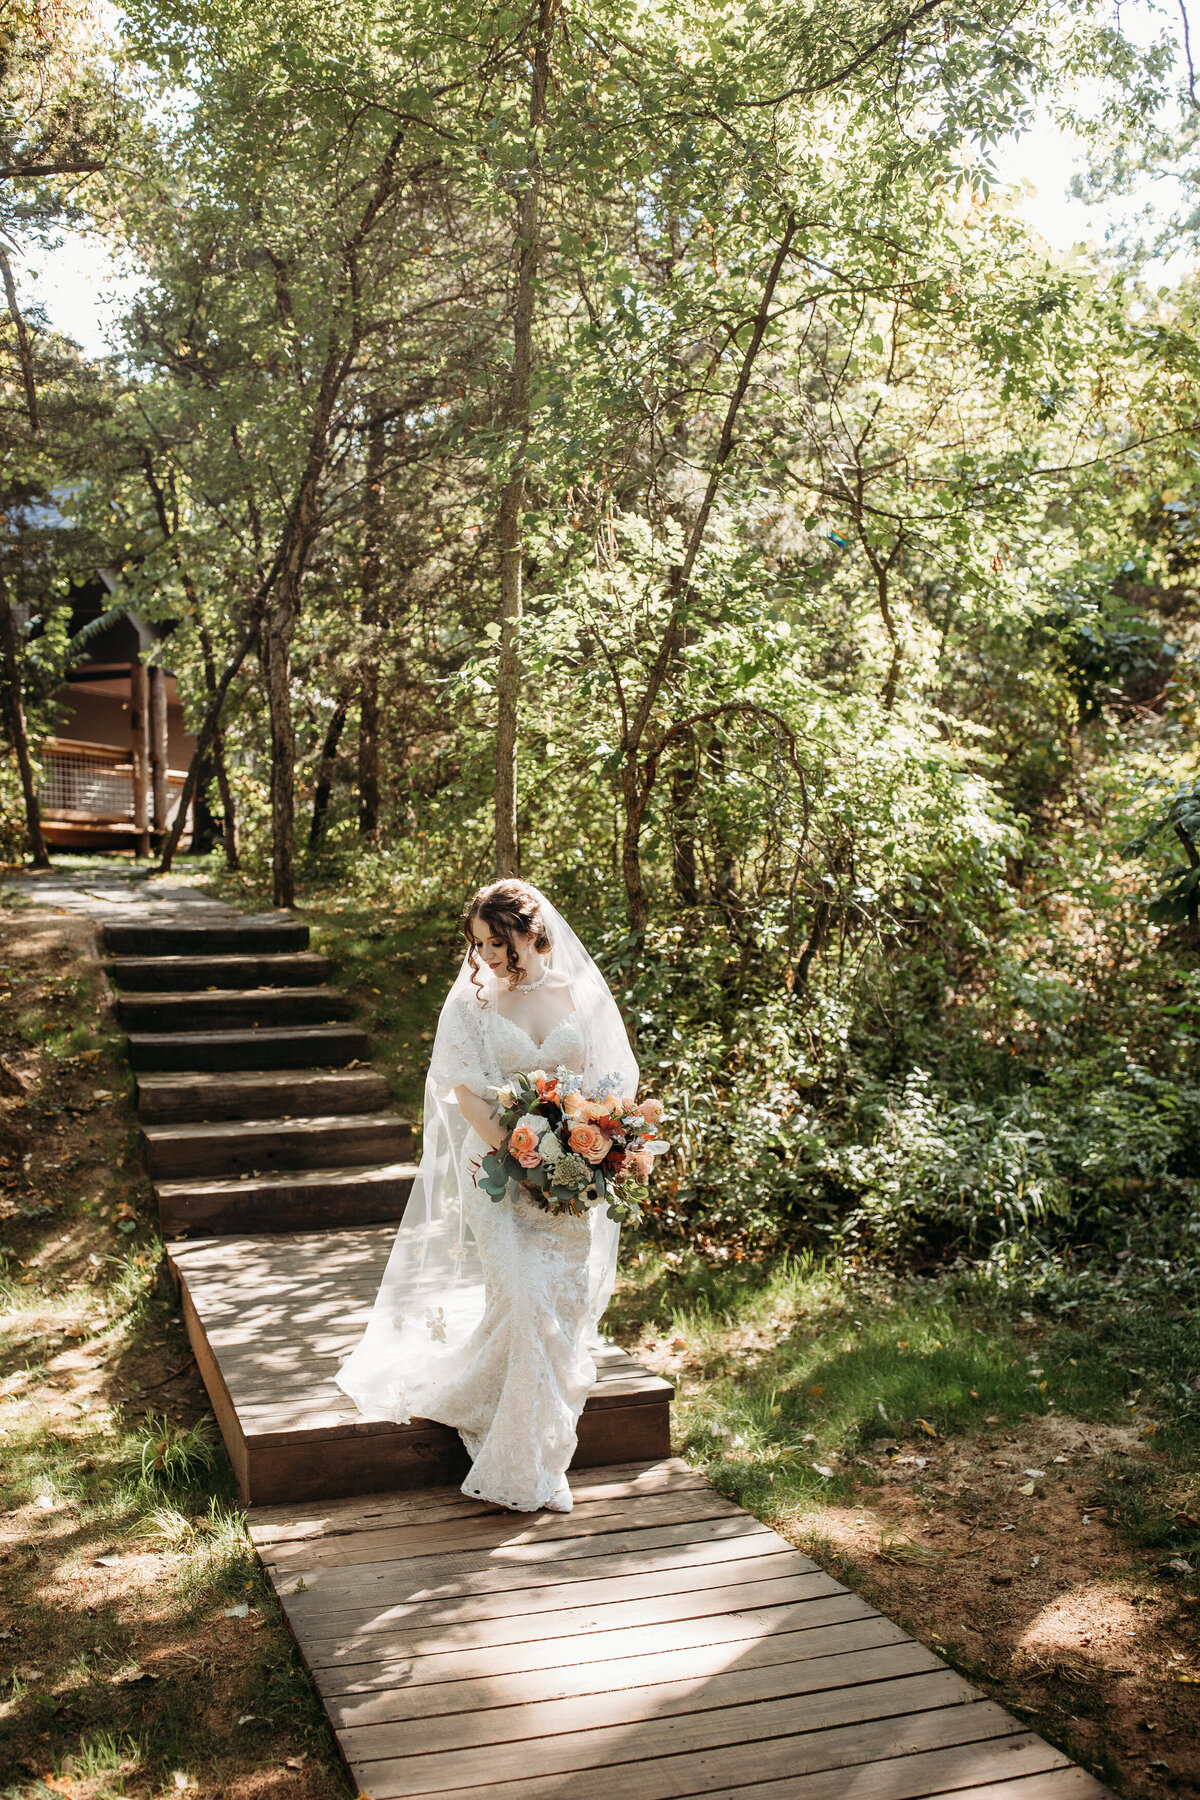 Bride descending a wooden stairway in a forest, sunlight streaming through the trees